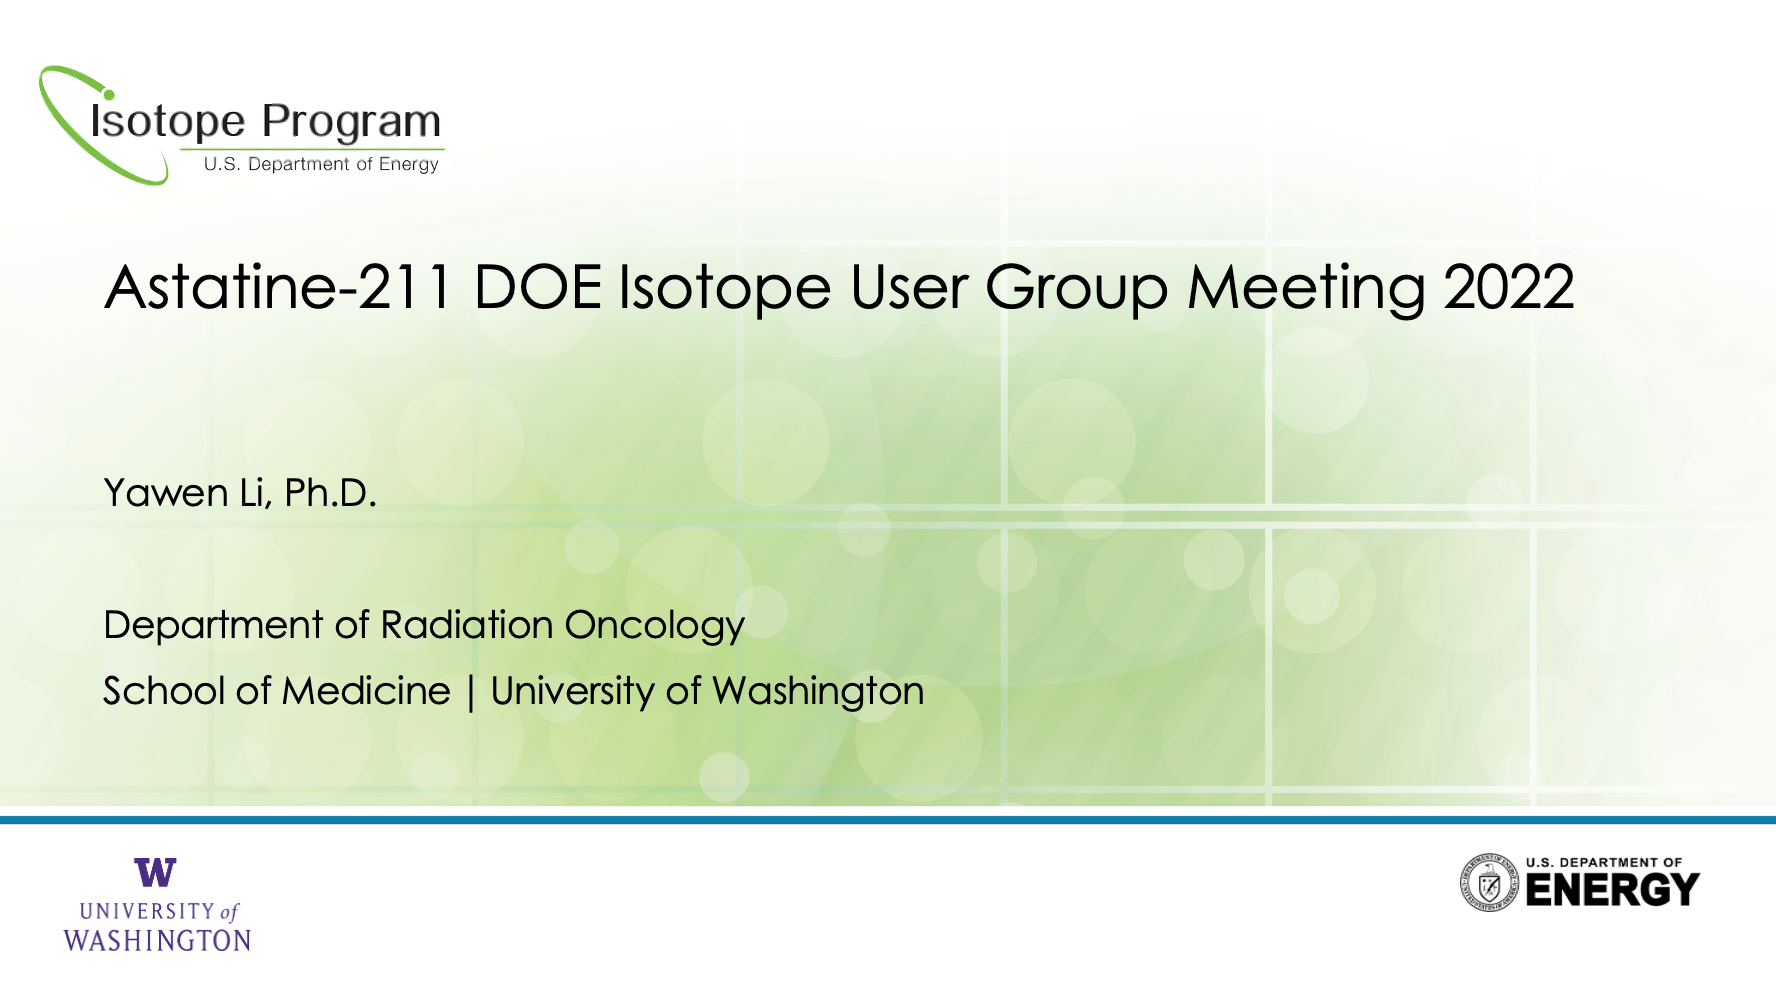 Astatine-211 DOE Isotope User Group Meeting 2022